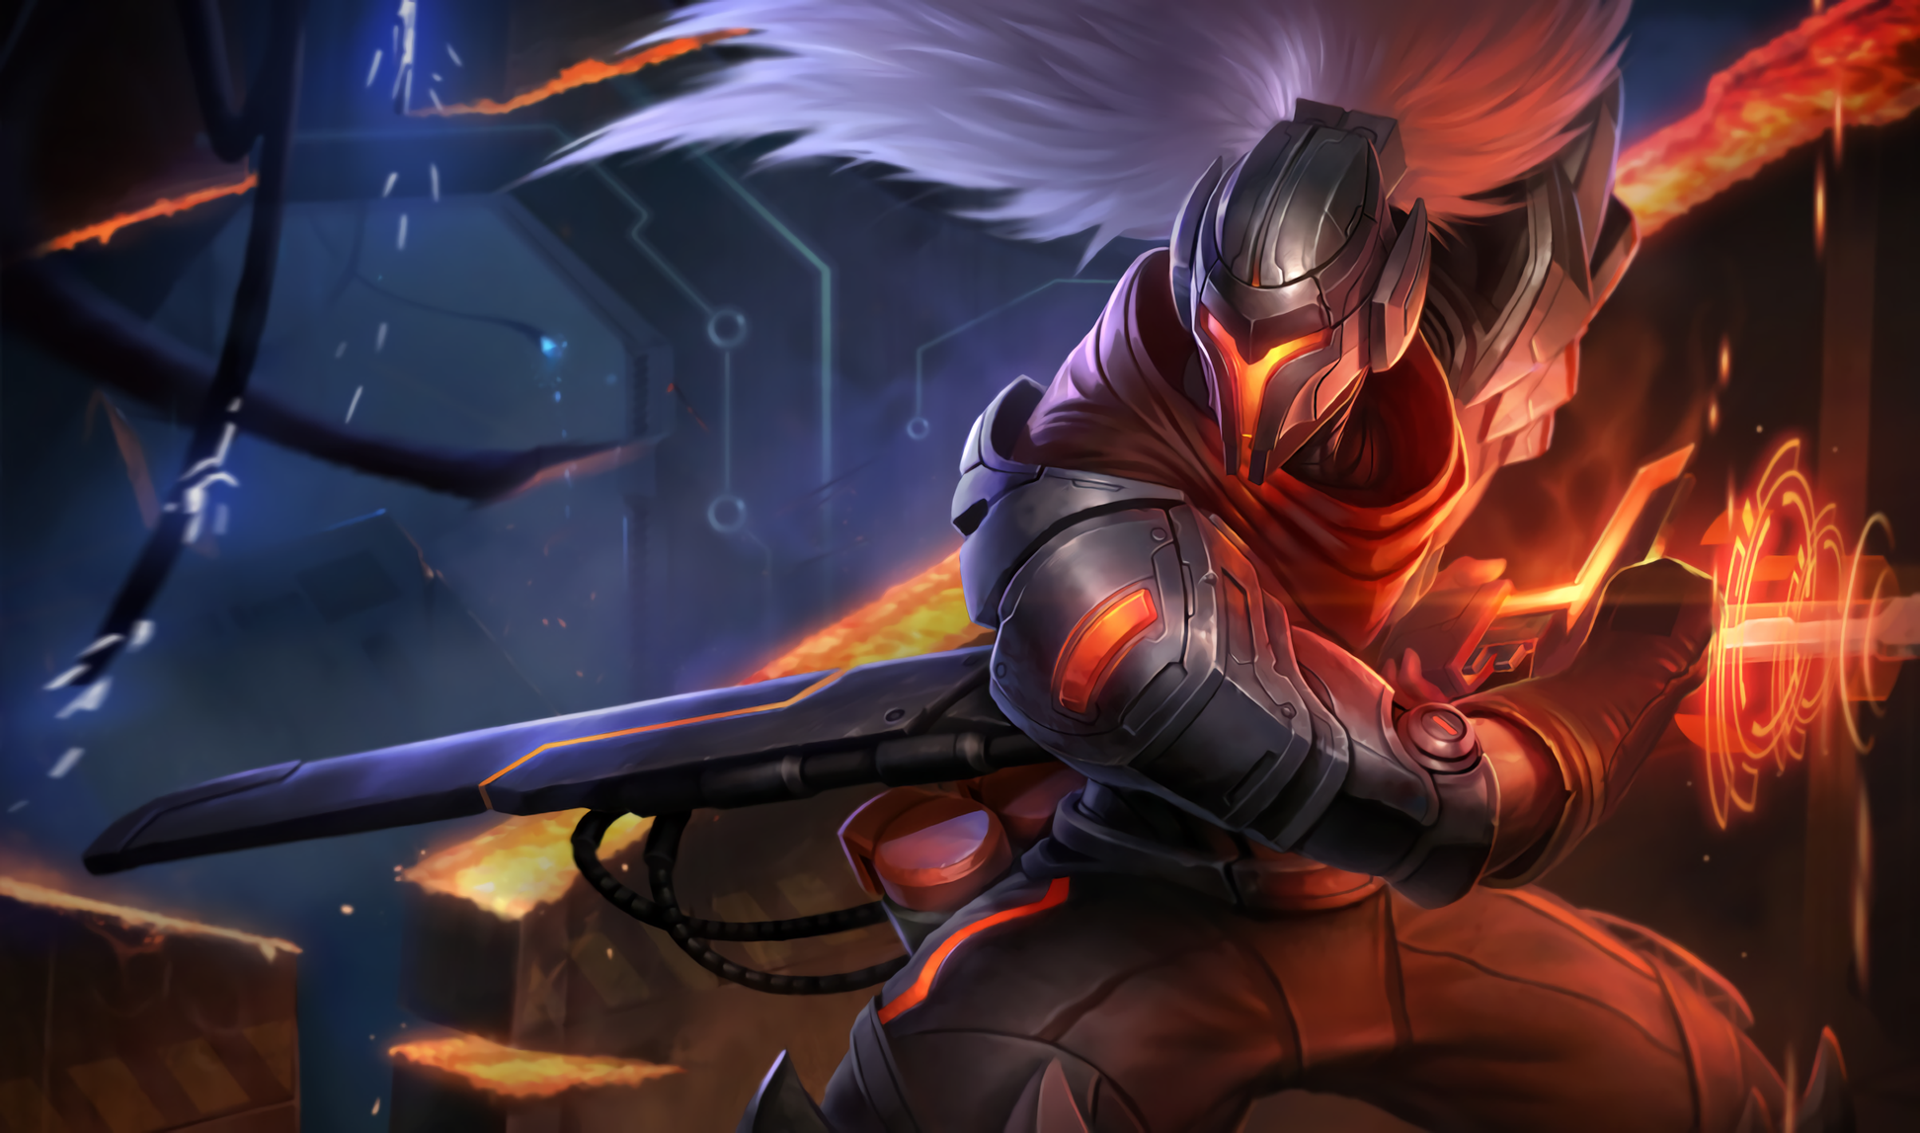 league of legends wallpaper hd 1920x1080,action adventure game,cg artwork,pc game,fictional character,games